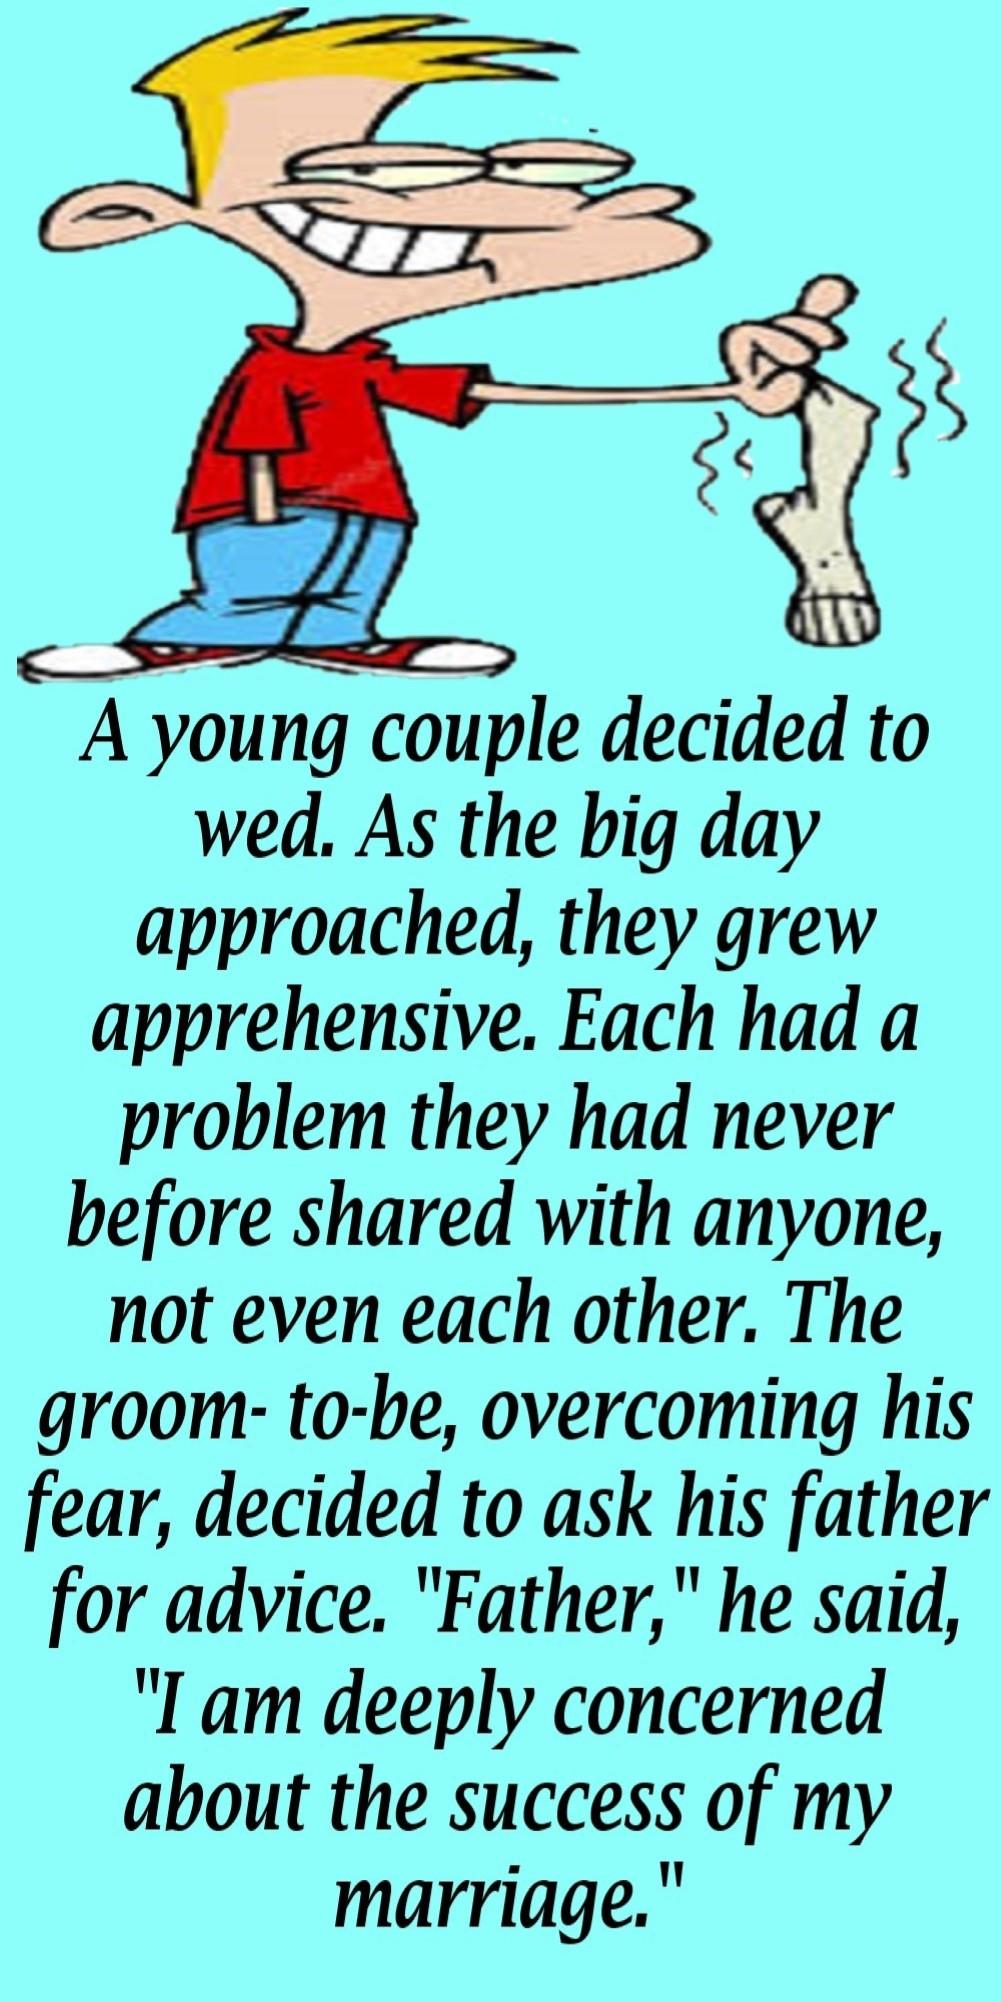 1A Couple Seeks Marriage Advice From Their Parents Humor - Clean Joke